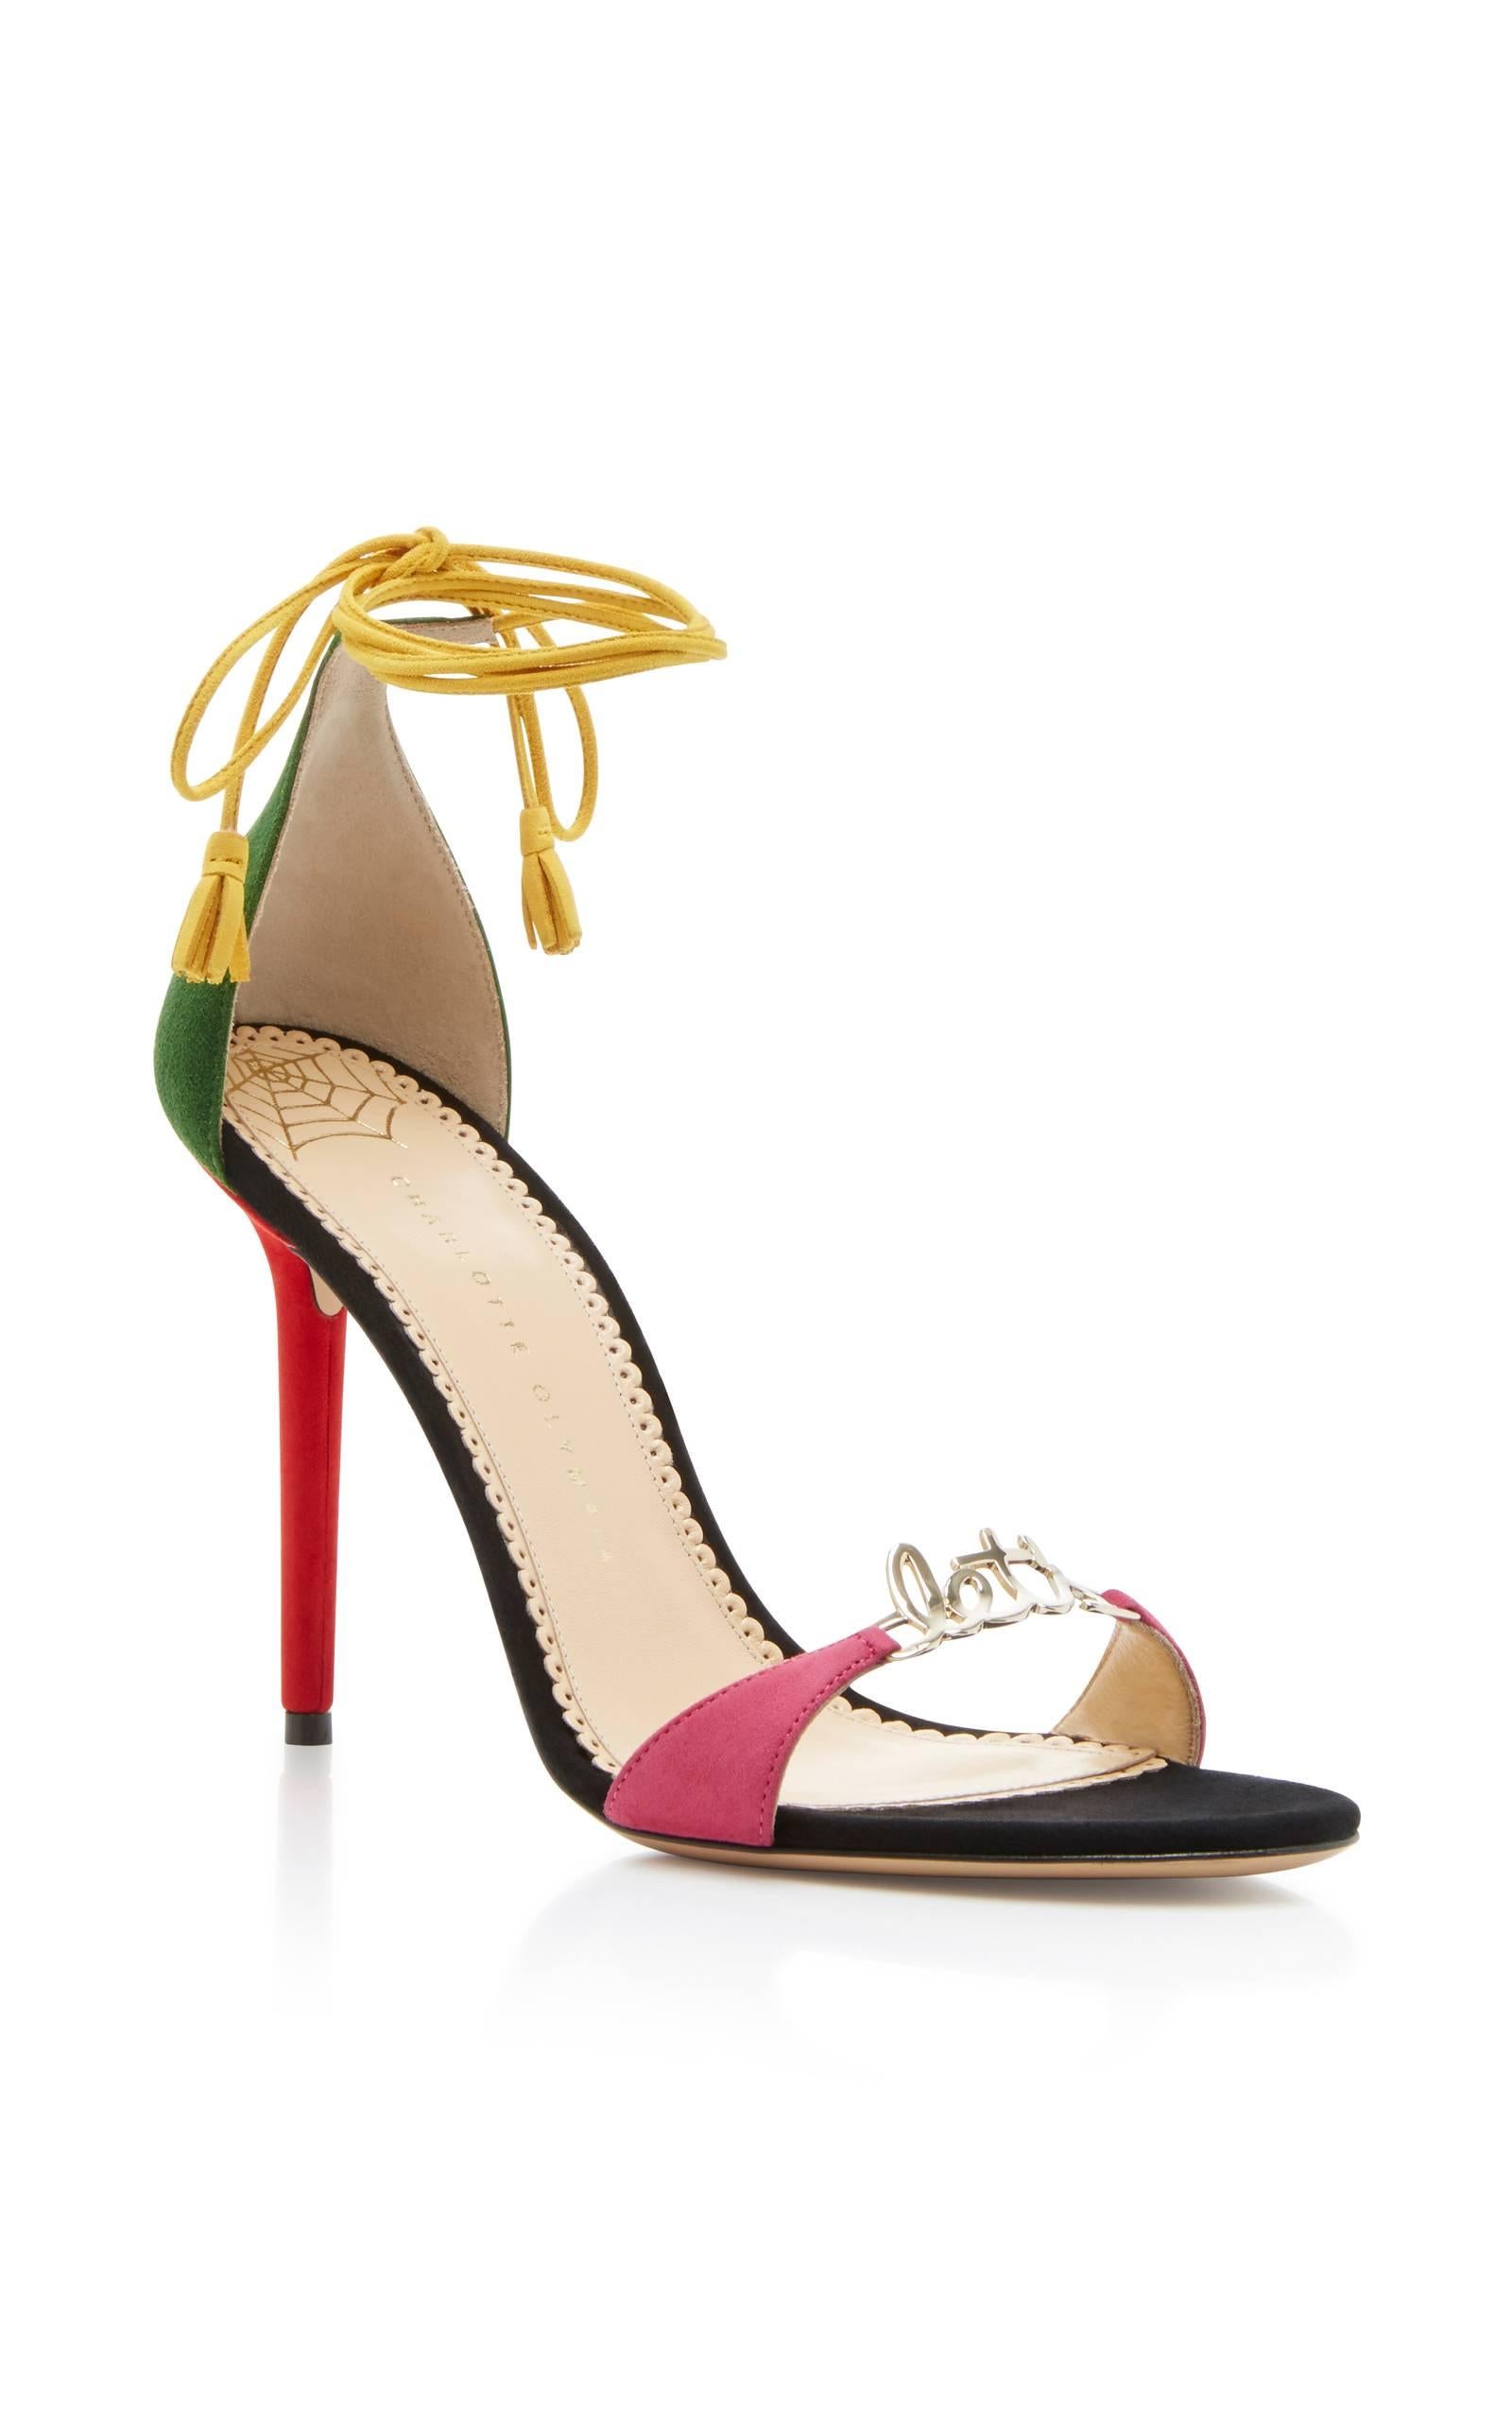 Charlotte Olympia New Colorblock 'Let's Dance' Conversation Sandals Heels in Box In New Condition In Chicago, IL